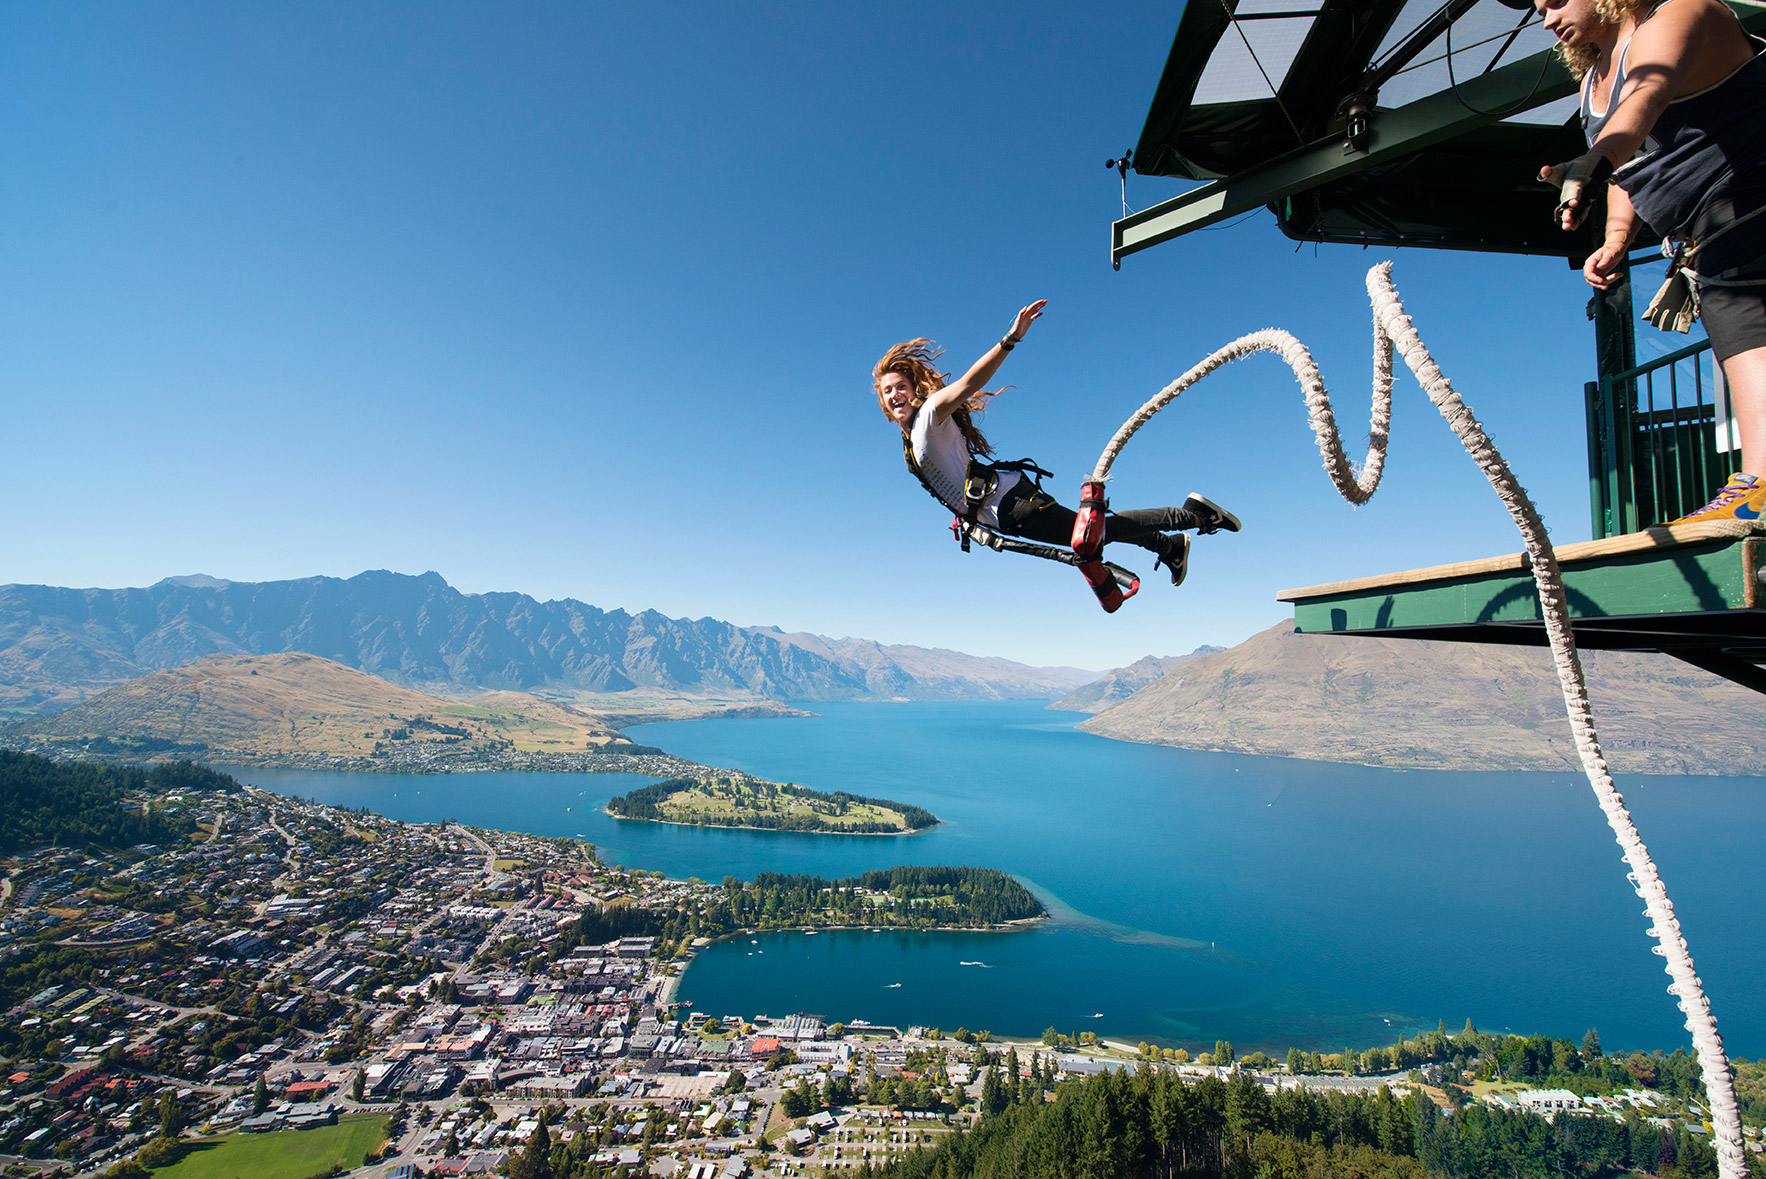 Bungy jumping